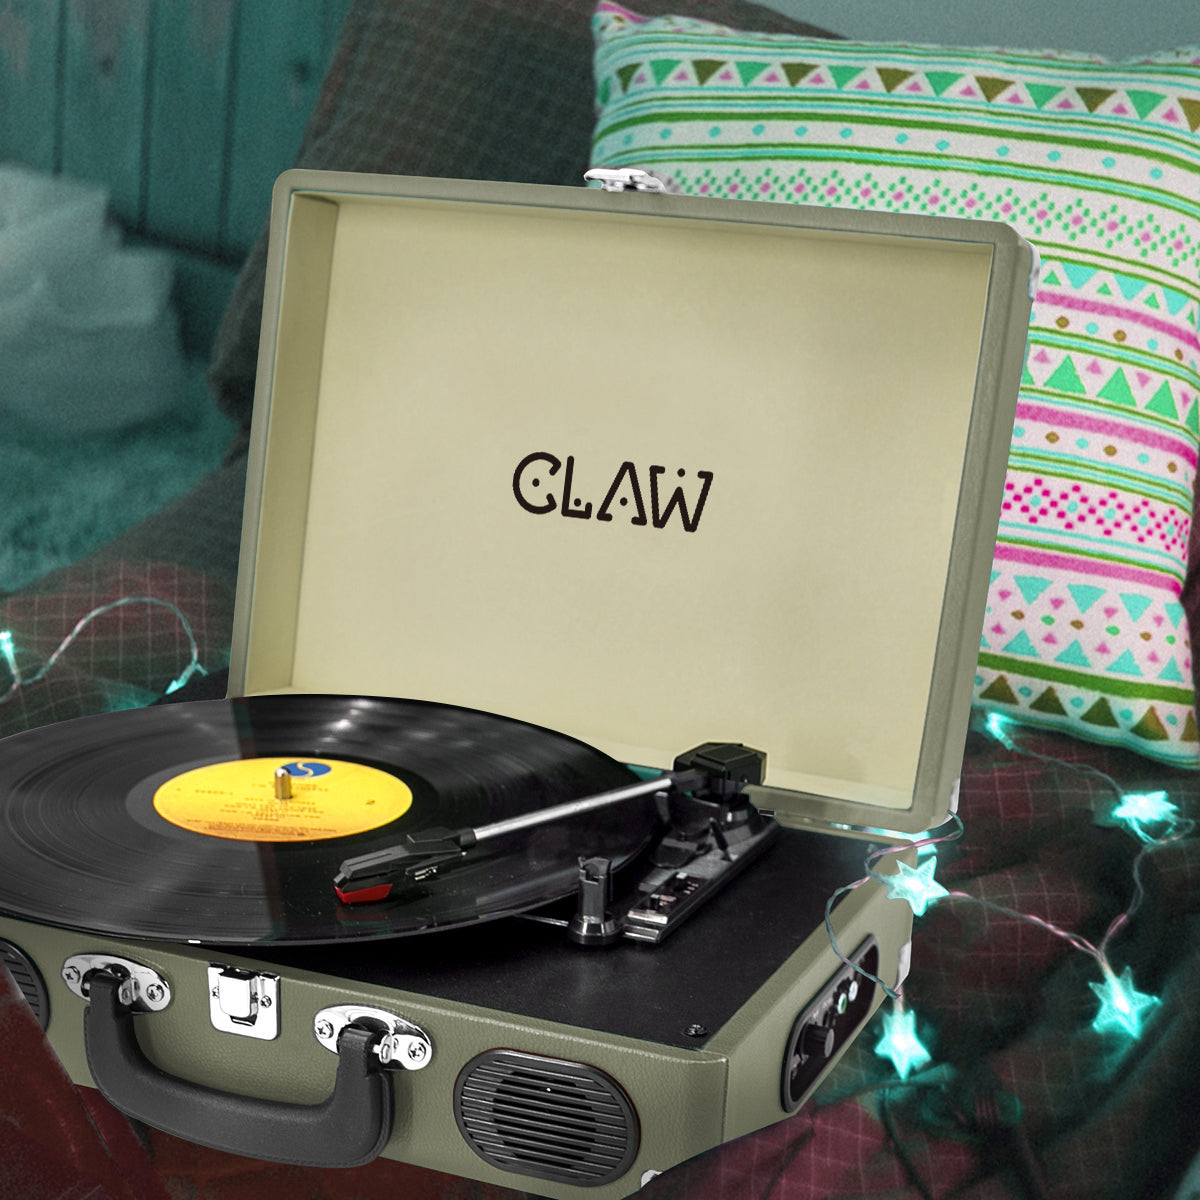 CLAW Stag Portable - Turntable with built-in stereo speaker (Celadon + Cream) (Use Code Origin5 to Get 5% Discount)